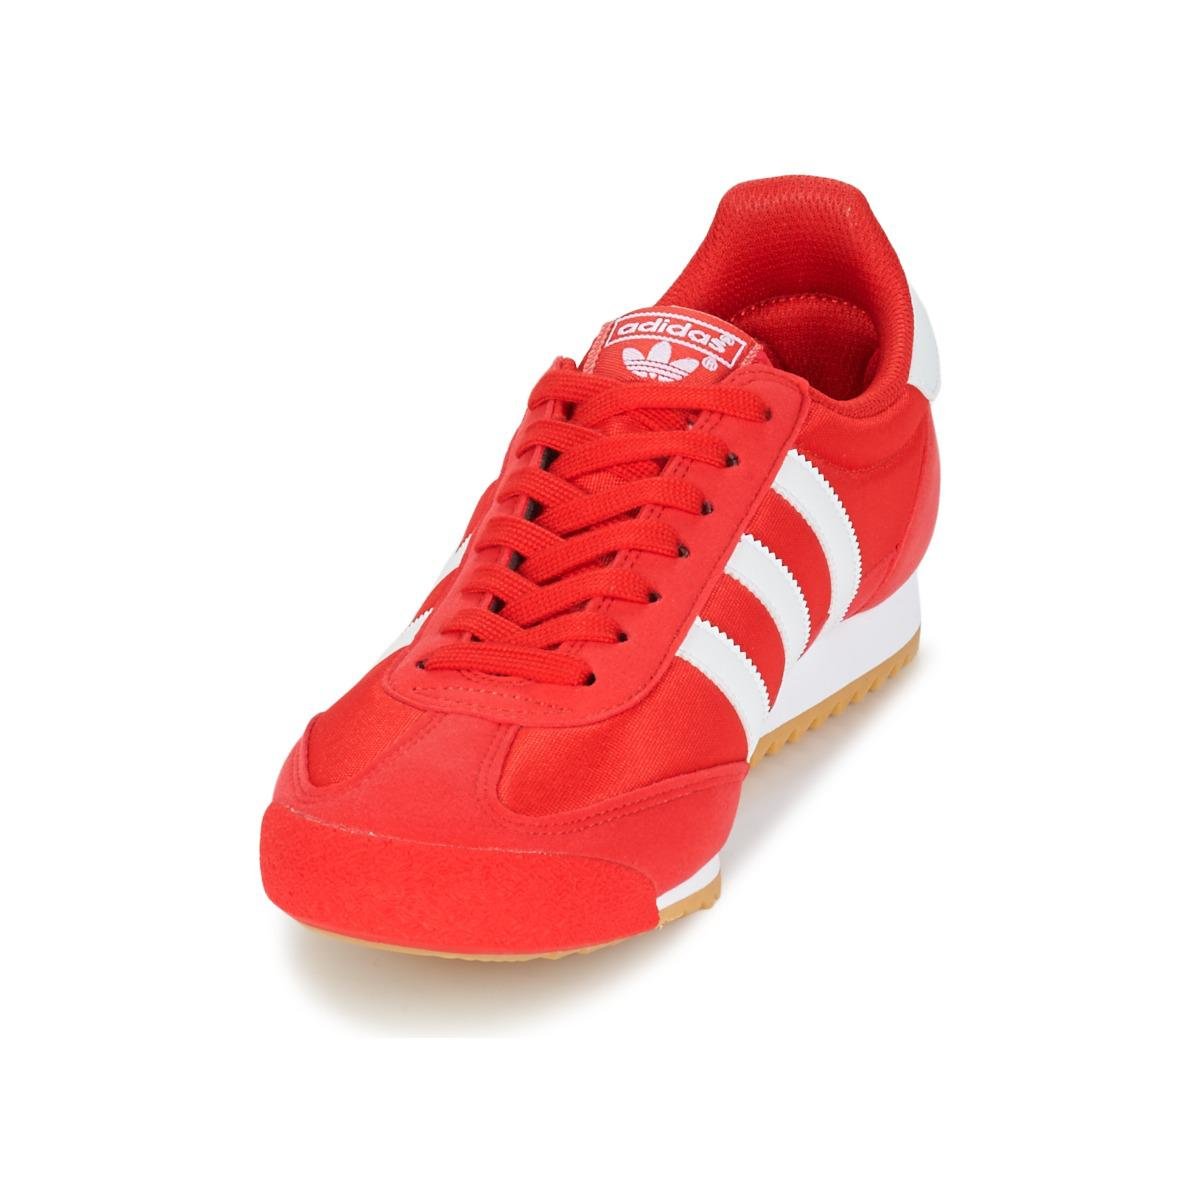 adidas 's Dragon Og Trainers in Red for Men - Lyst